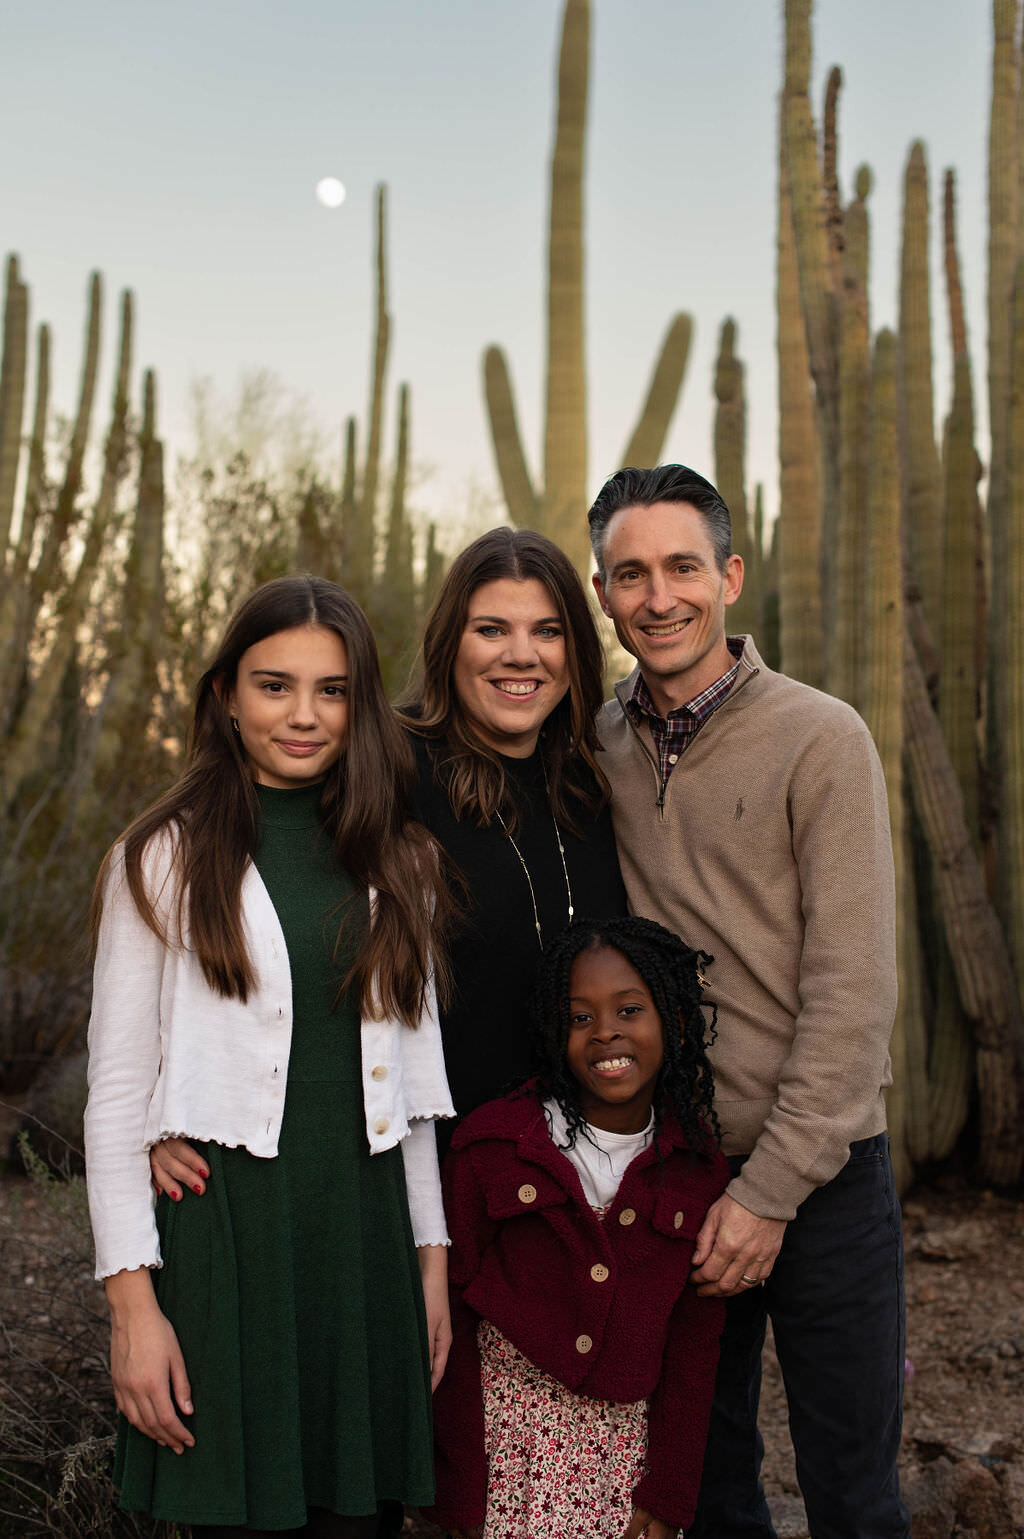 A family standing together smiling with desert plants behind them.